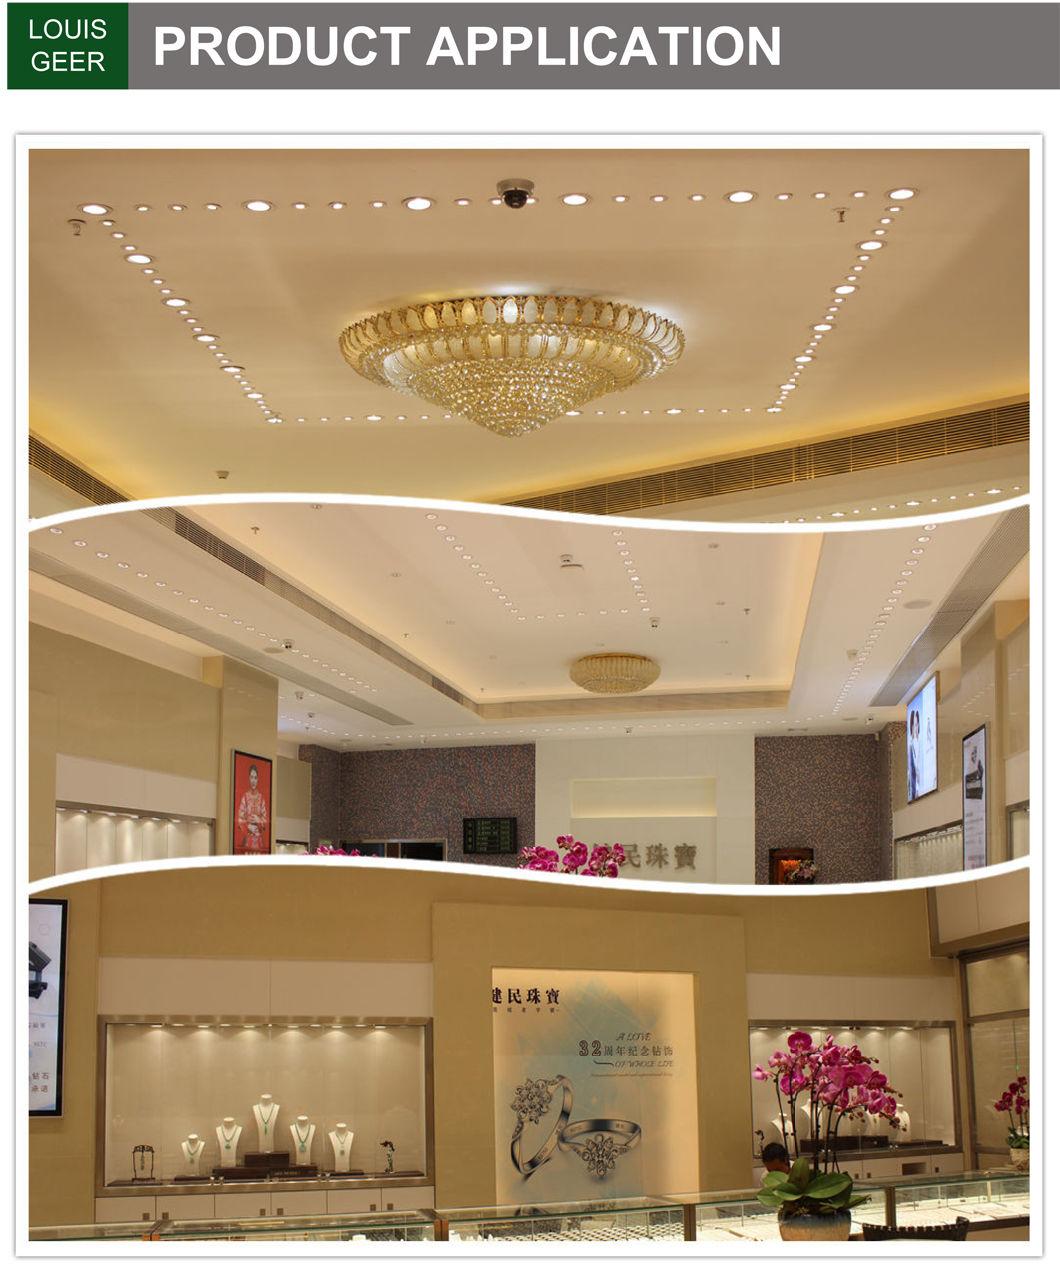 High Quality Good Price Dimmable Recessed Anti Glare Mini COB Ceiling LED Spot Light